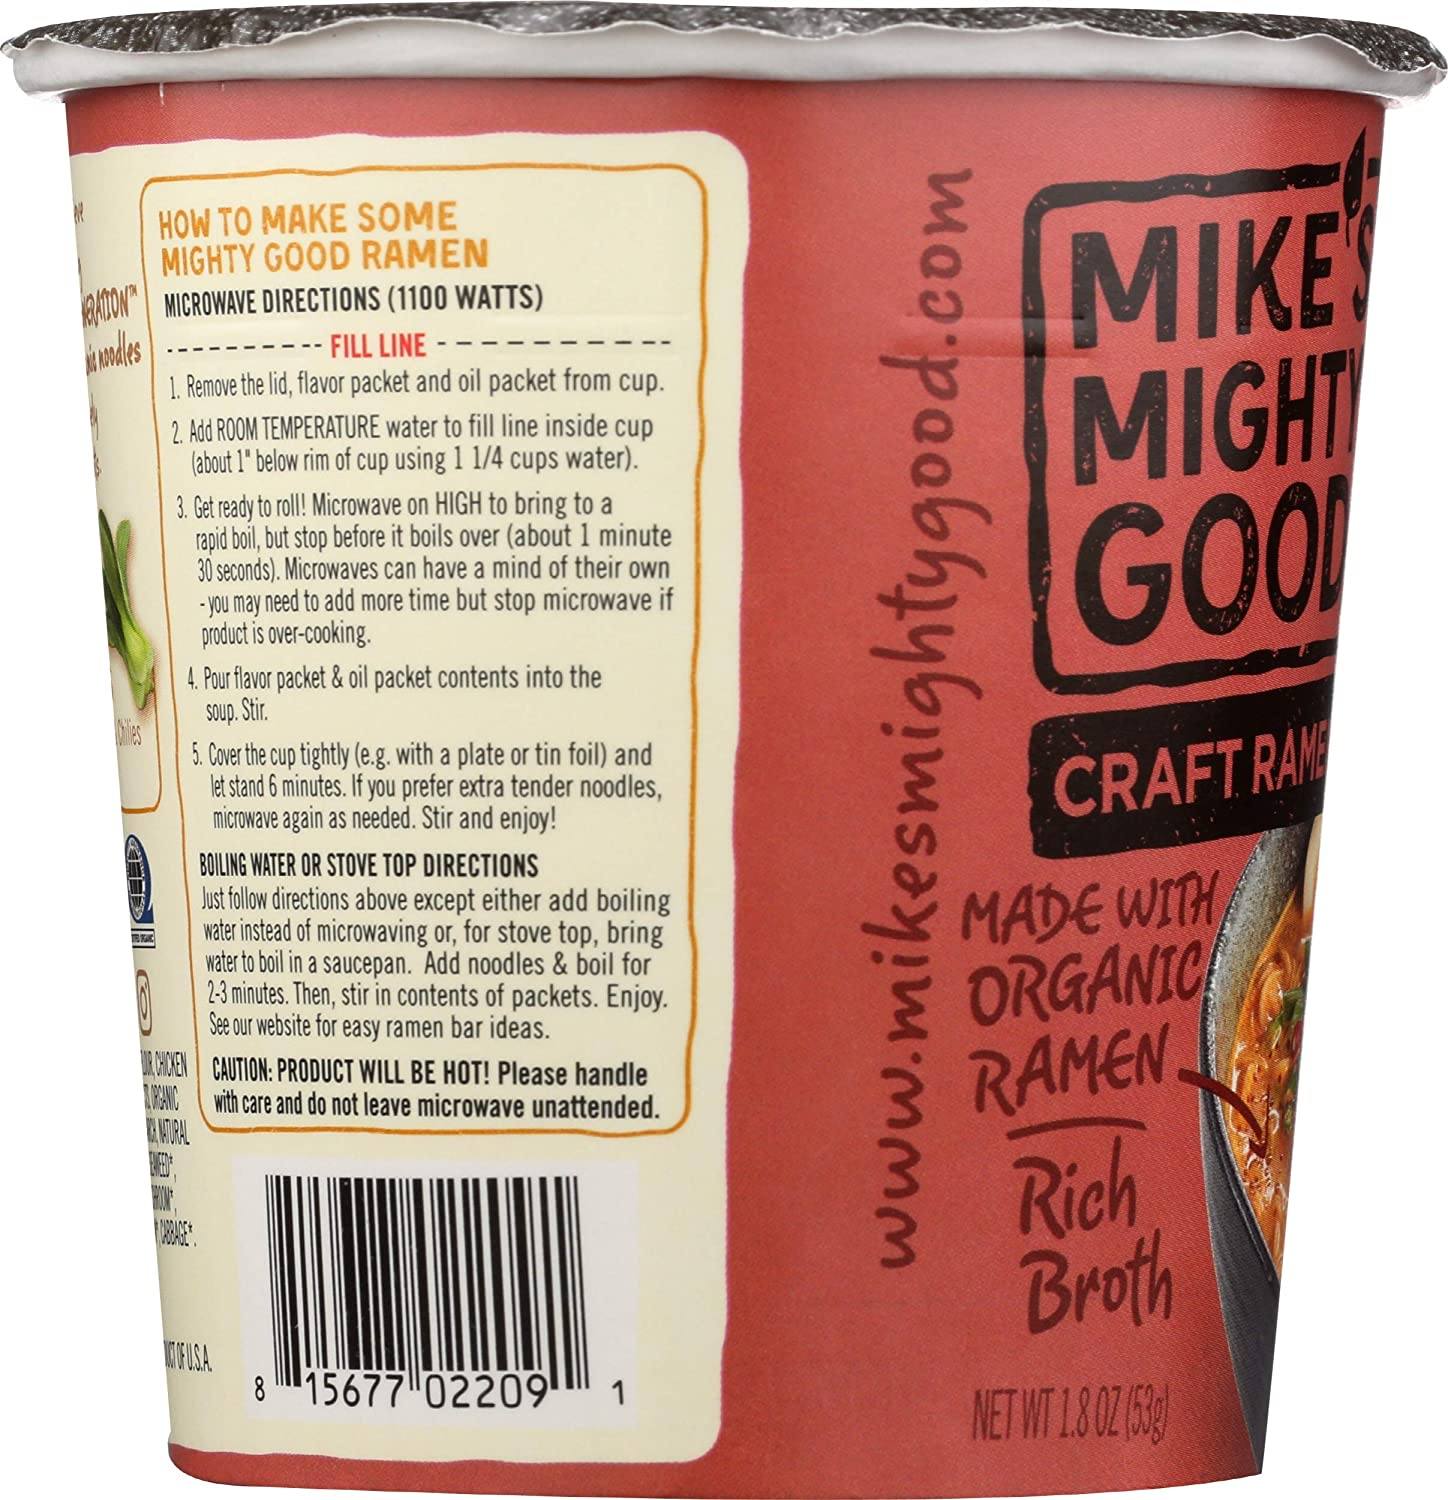 Mike's Mighty Good Craft Ramen Mike's Mighty Good 